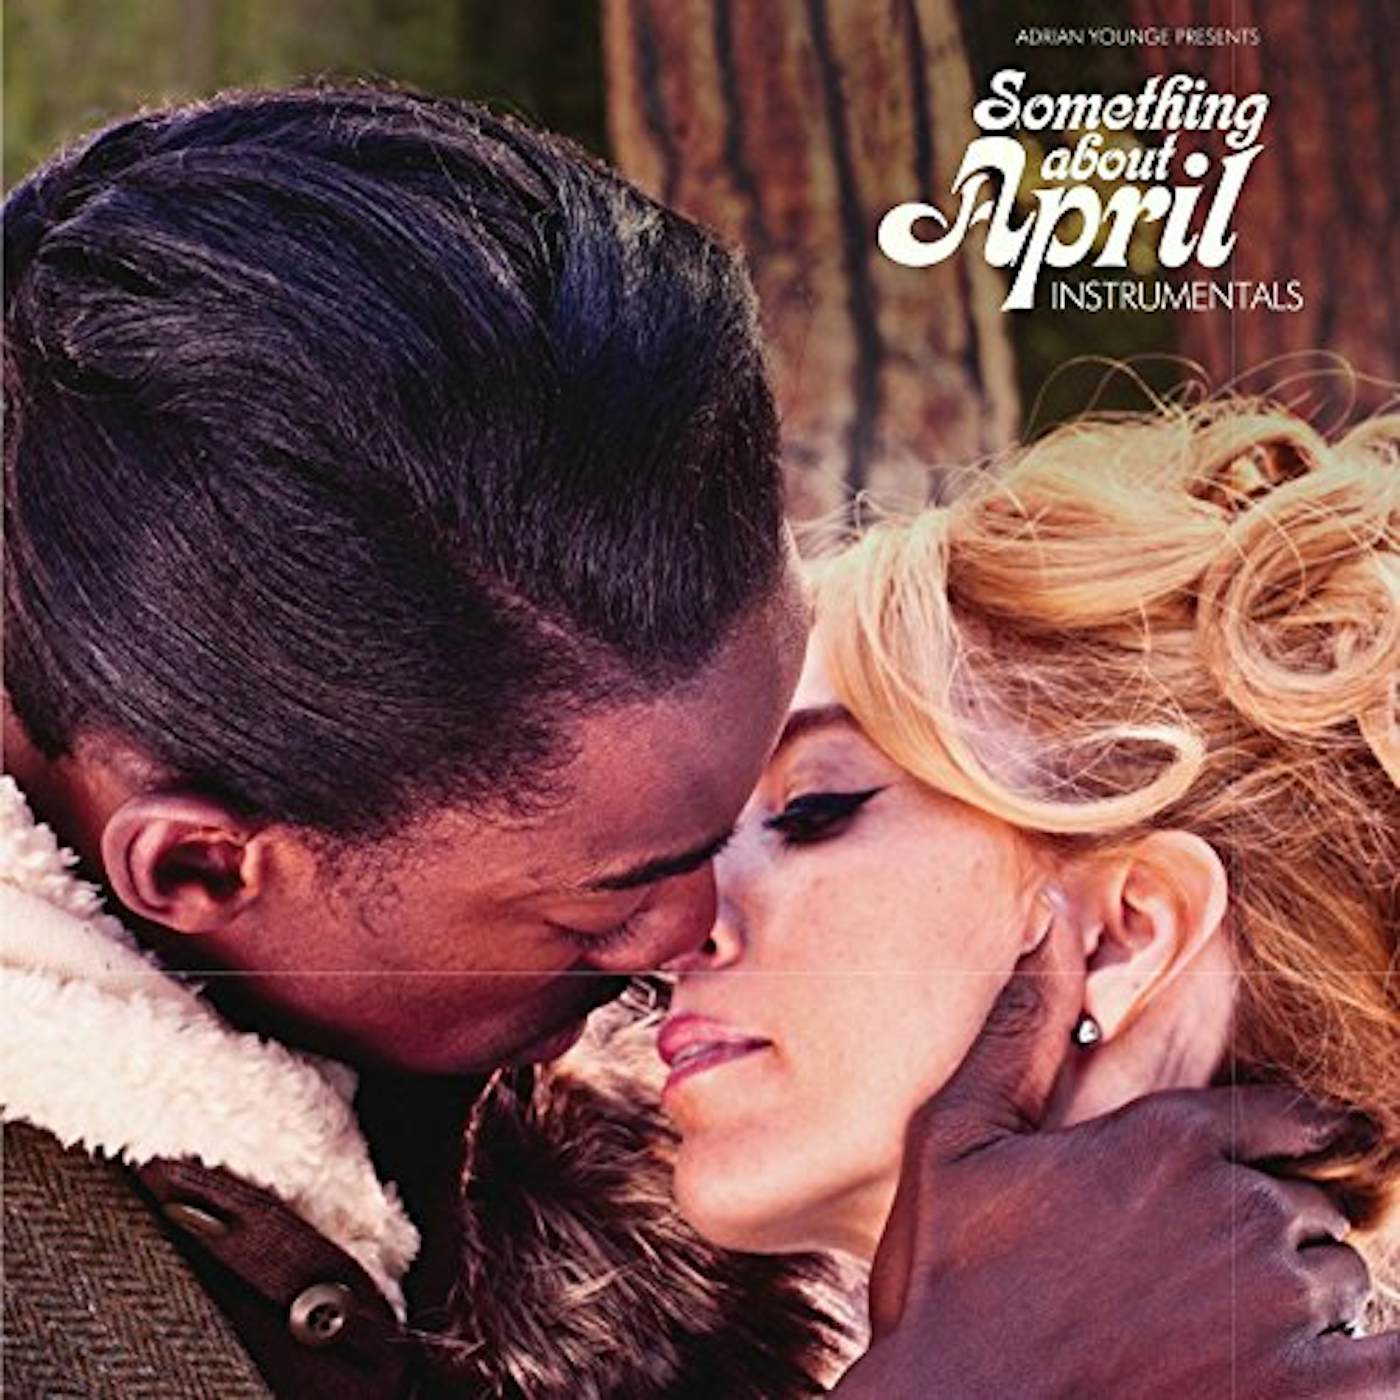 Adrian Younge SOMETHING ABOUT APRIL (INSTRUMENTALS) Vinyl Record